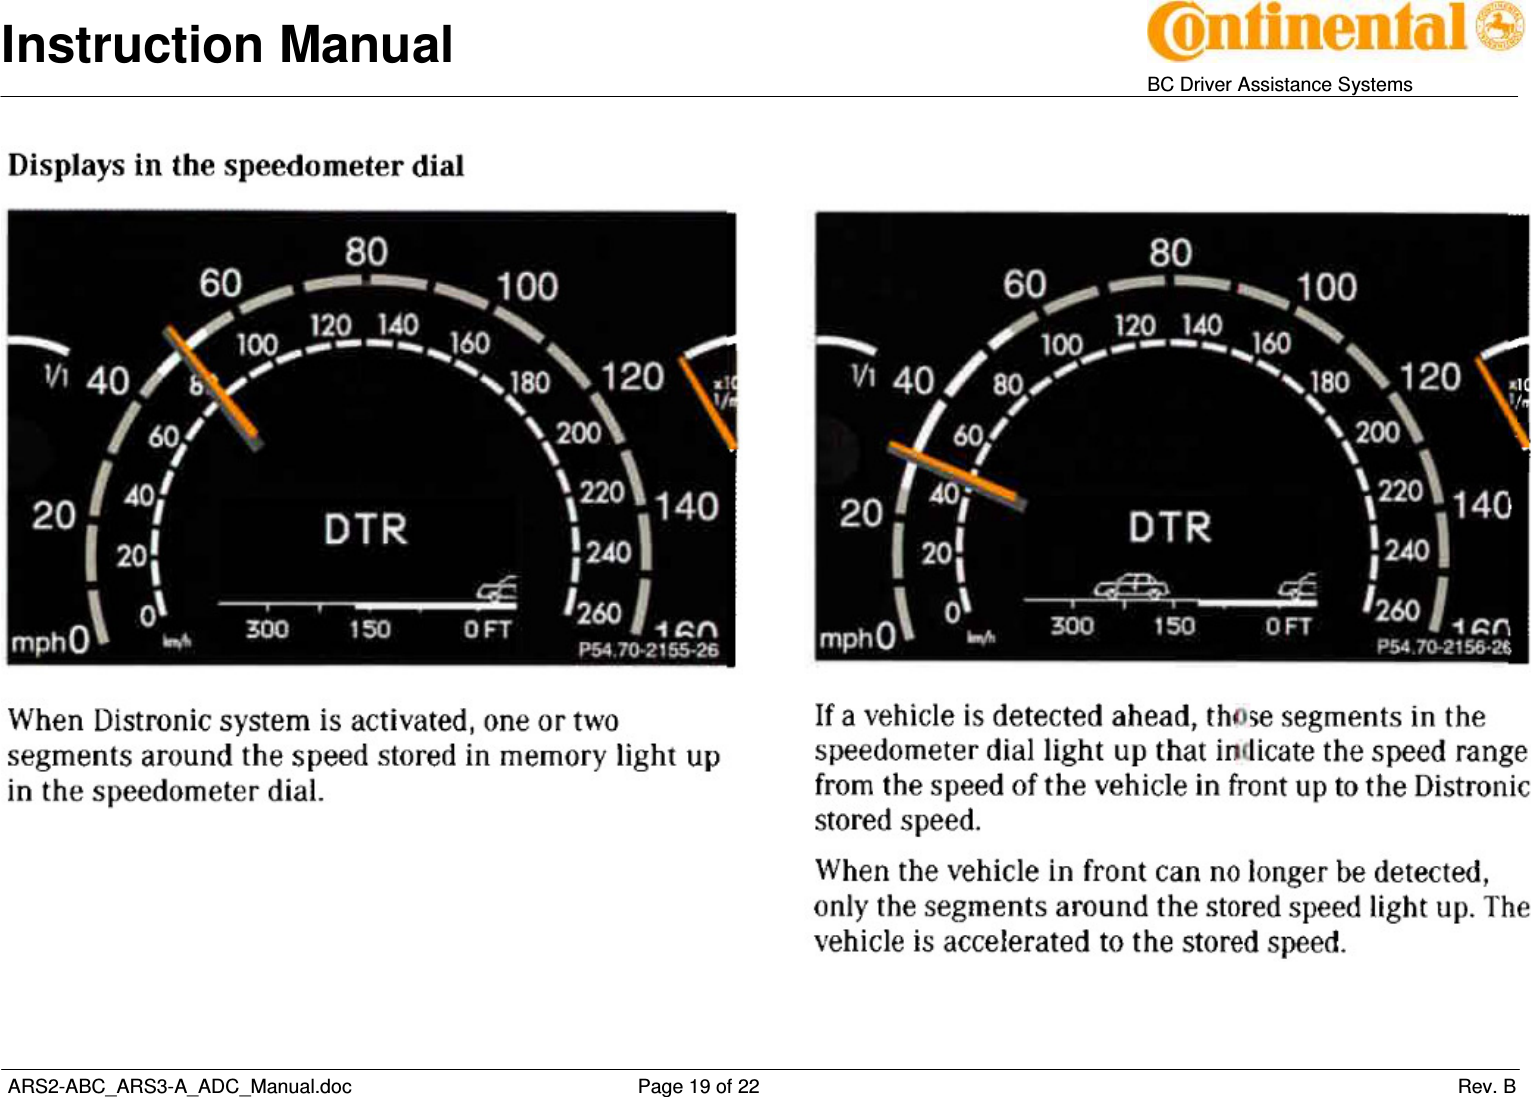 Instruction Manual   BC Driver Assistance Systems  ARS2-ABC_ARS3-A_ADC_Manual.doc     Page 19 of 22                 Rev. B   